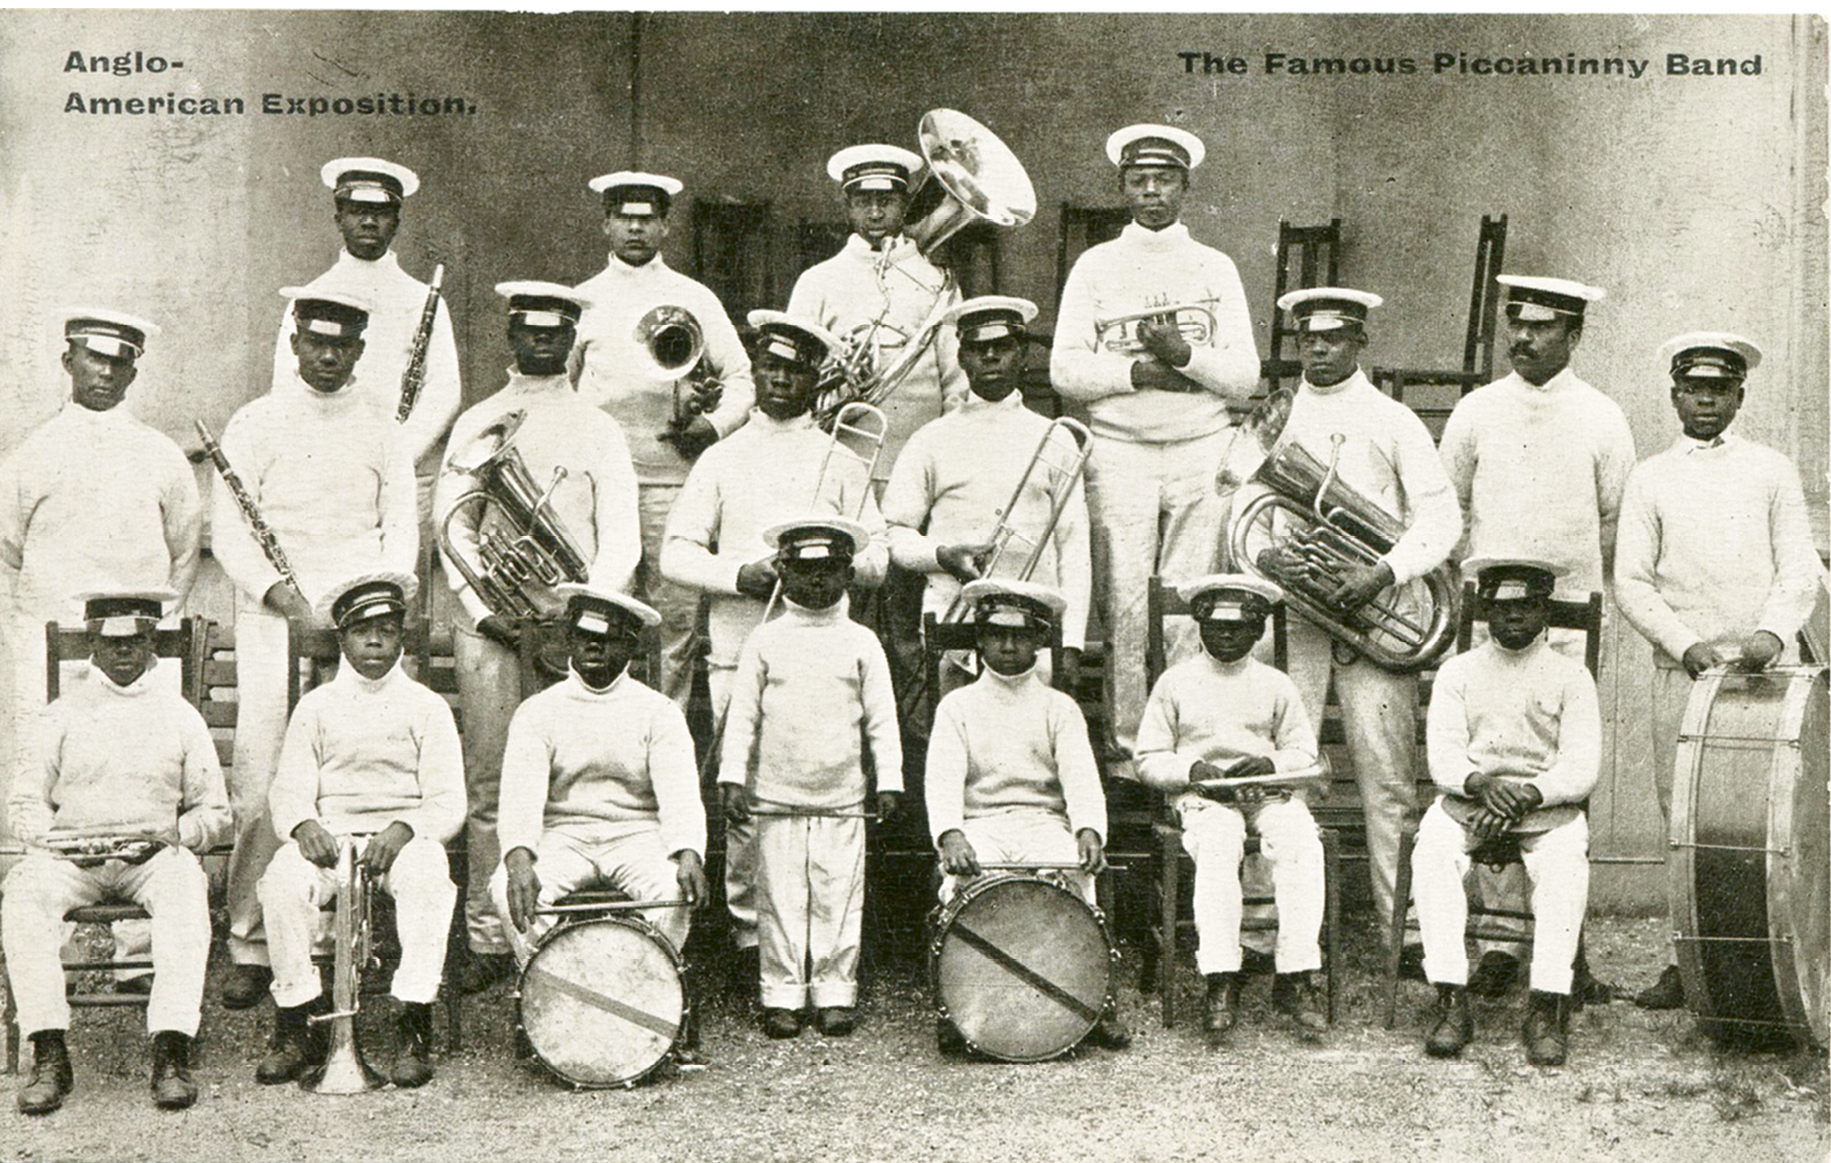 A postcard billing the Jenkins band as “The Famous Piccaninny Band”